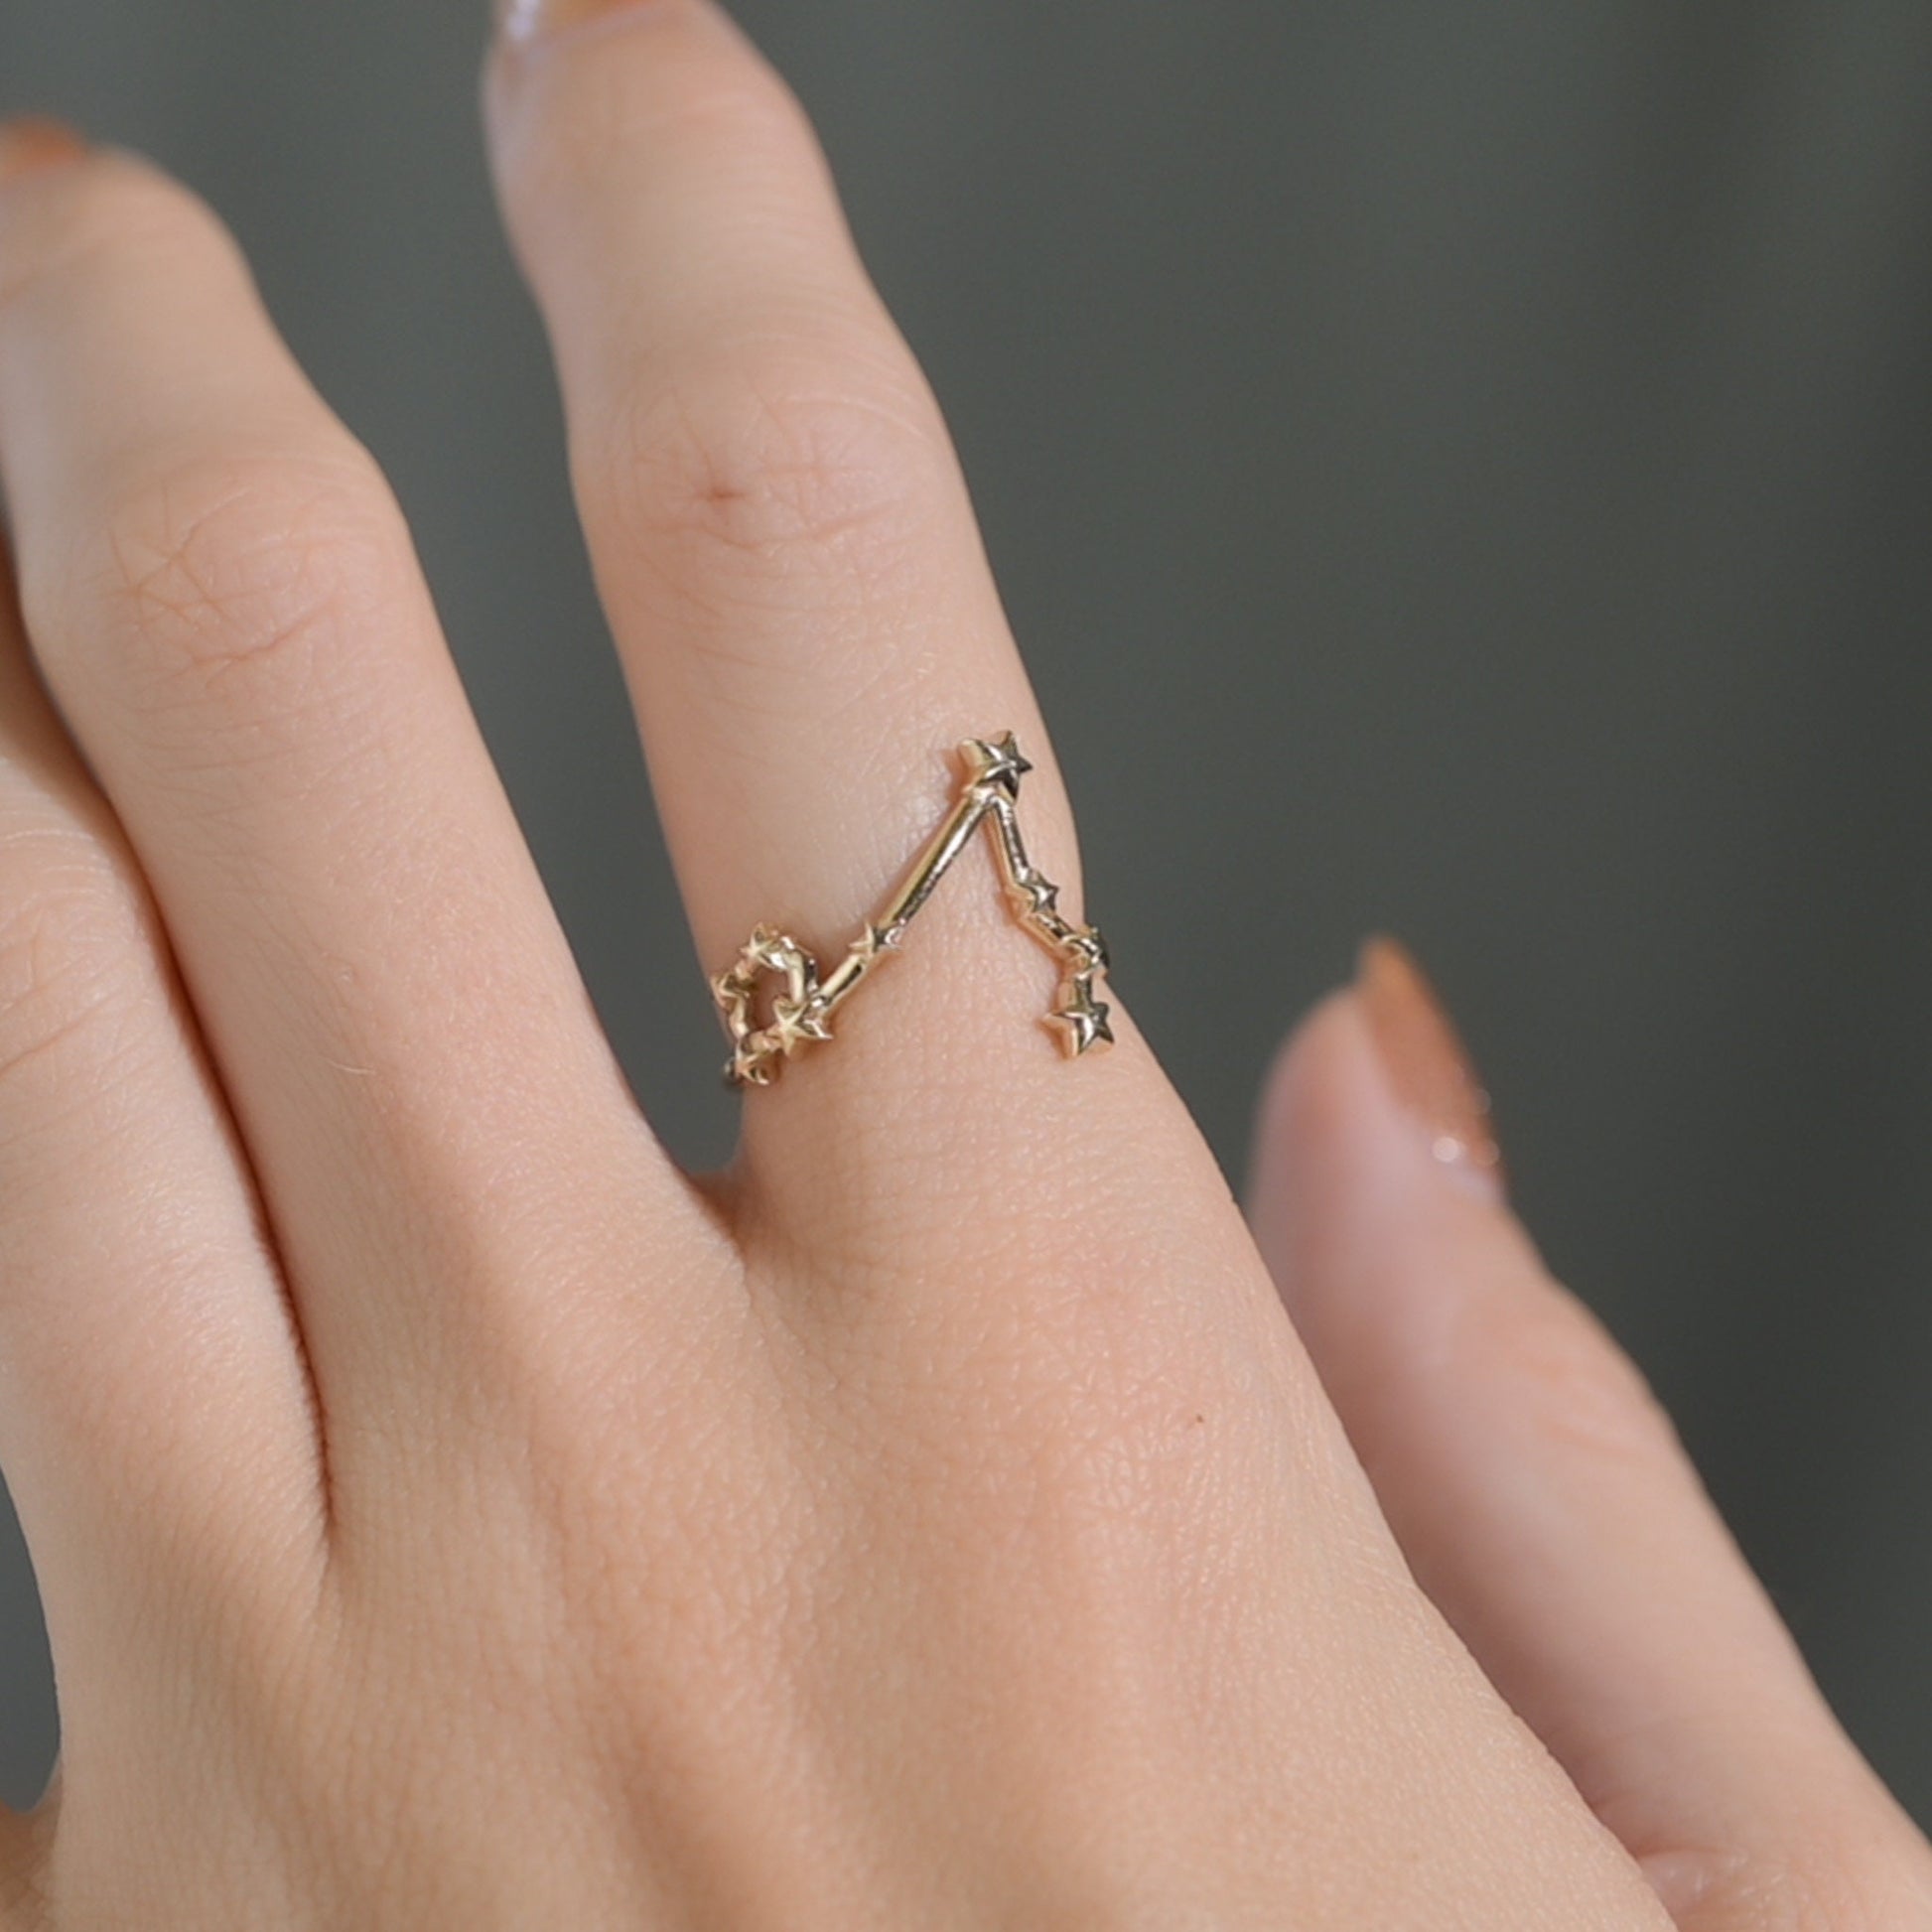 Solid Gold Pisces, Star Sign Dainty Celestial Zodiac Ring in solid 14K Yellow Gold, 14k White Gold, 14K Rose Gold